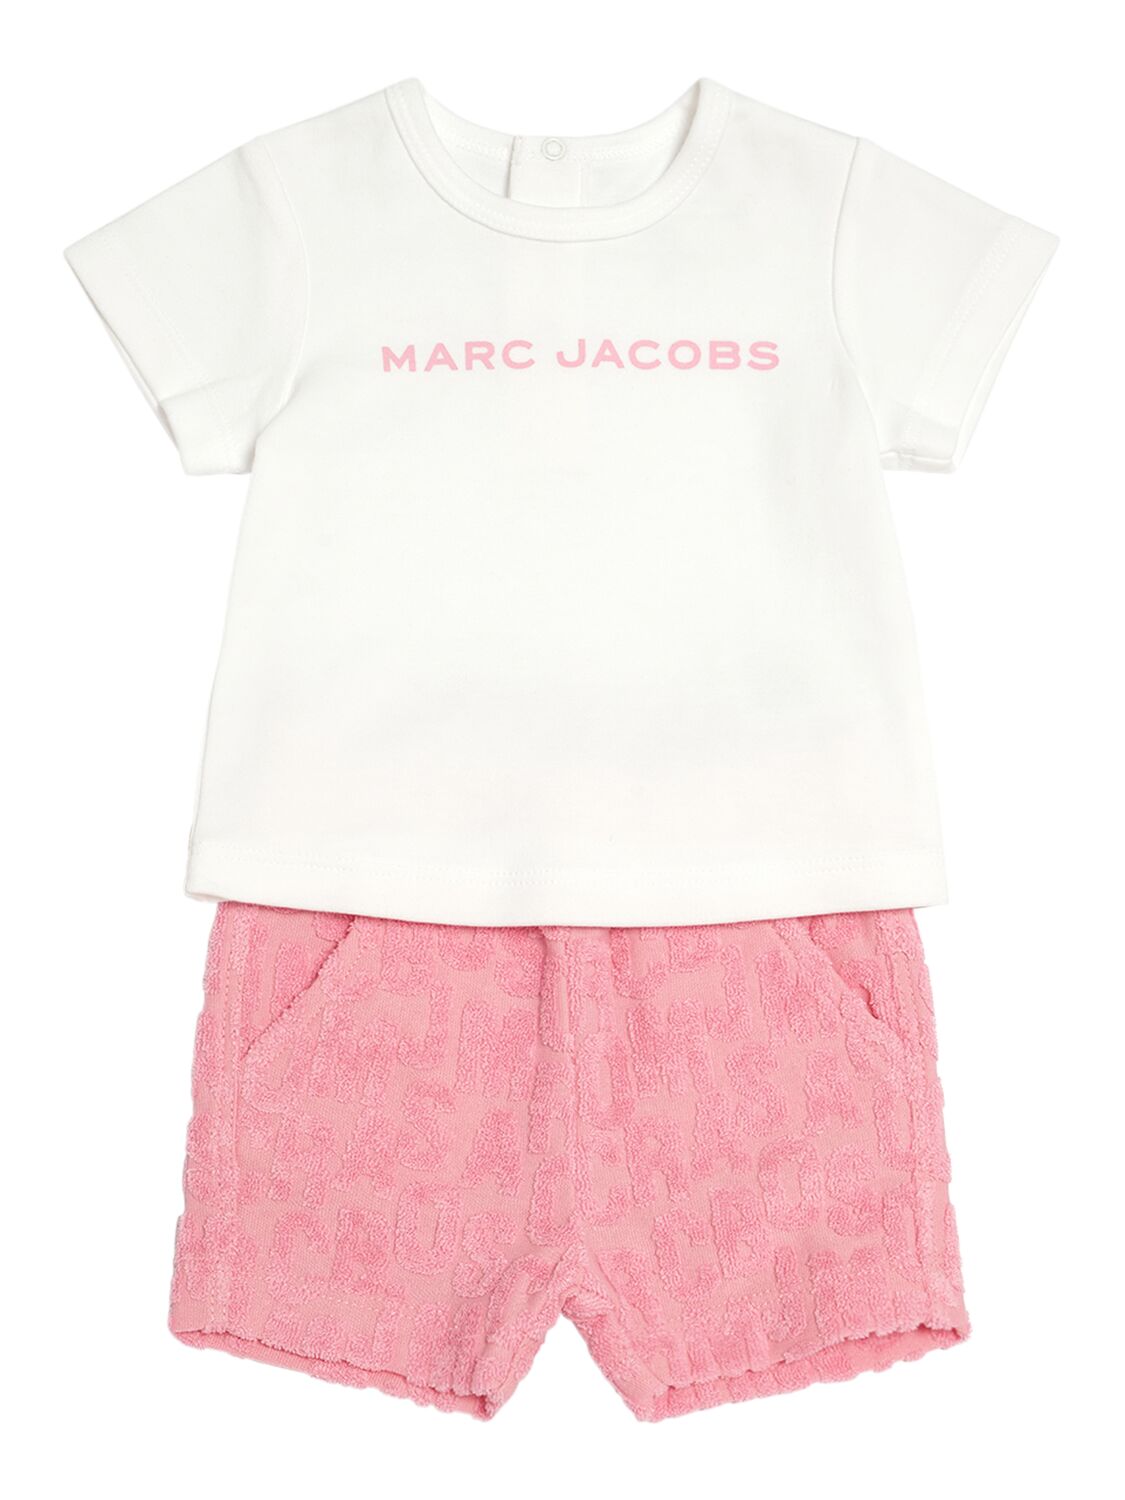 Marc Jacobs Kids' Cotton Jersey T-shirt & Sweat Shorts In Pink